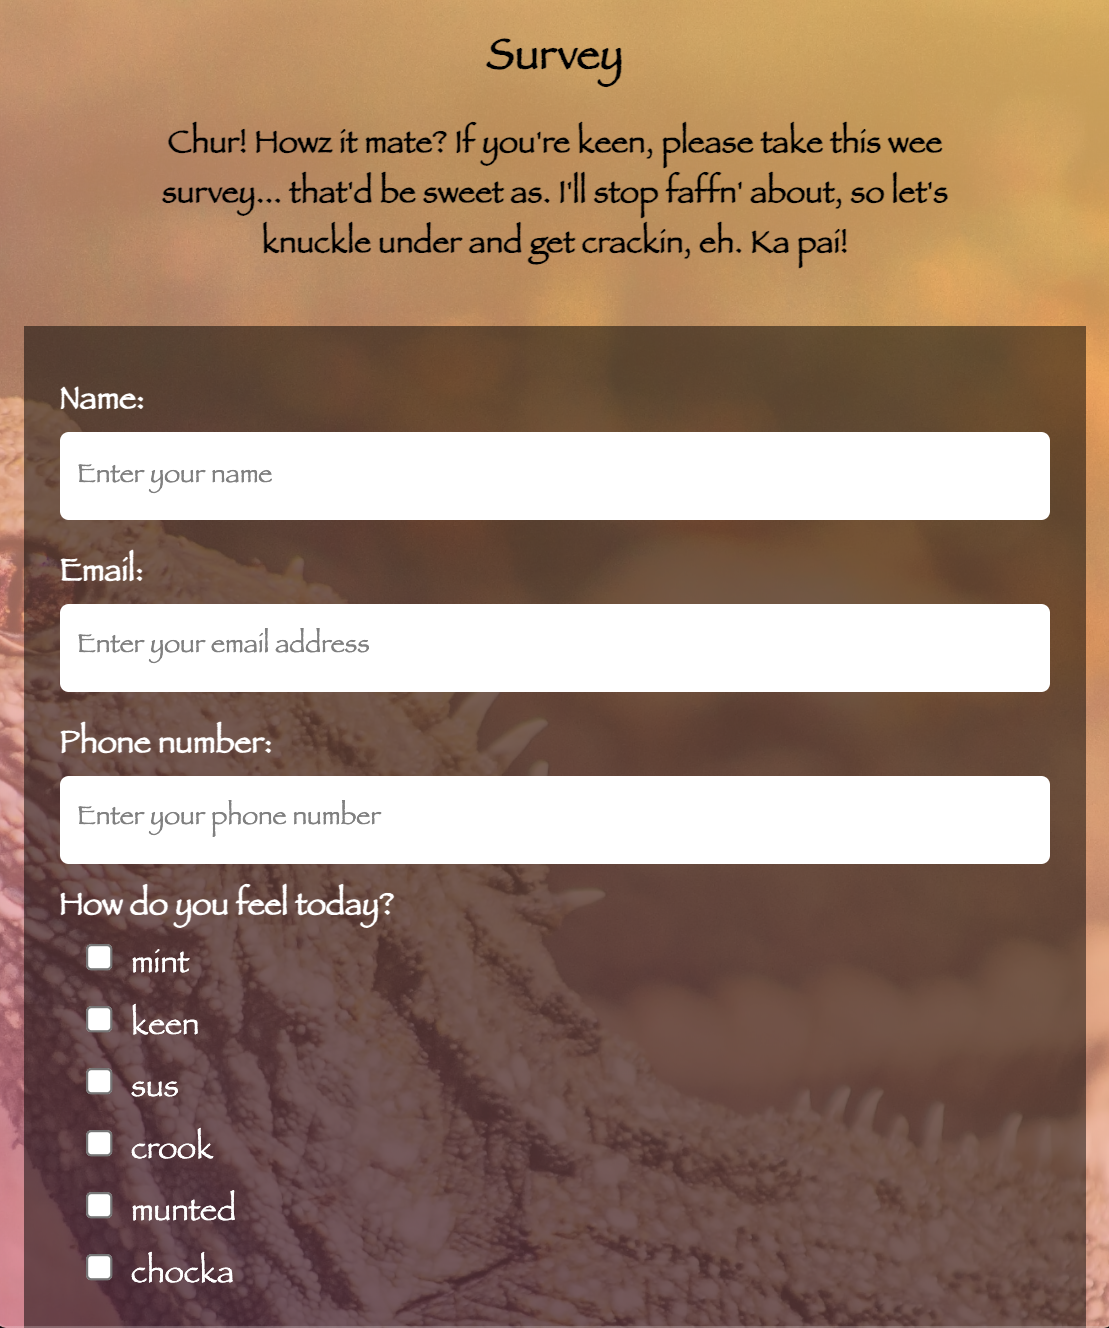 Survey with orange and purple tuatara lizard background asking for basics (name, phone, email), and how you feel today with kiwi slang options and survey intro.